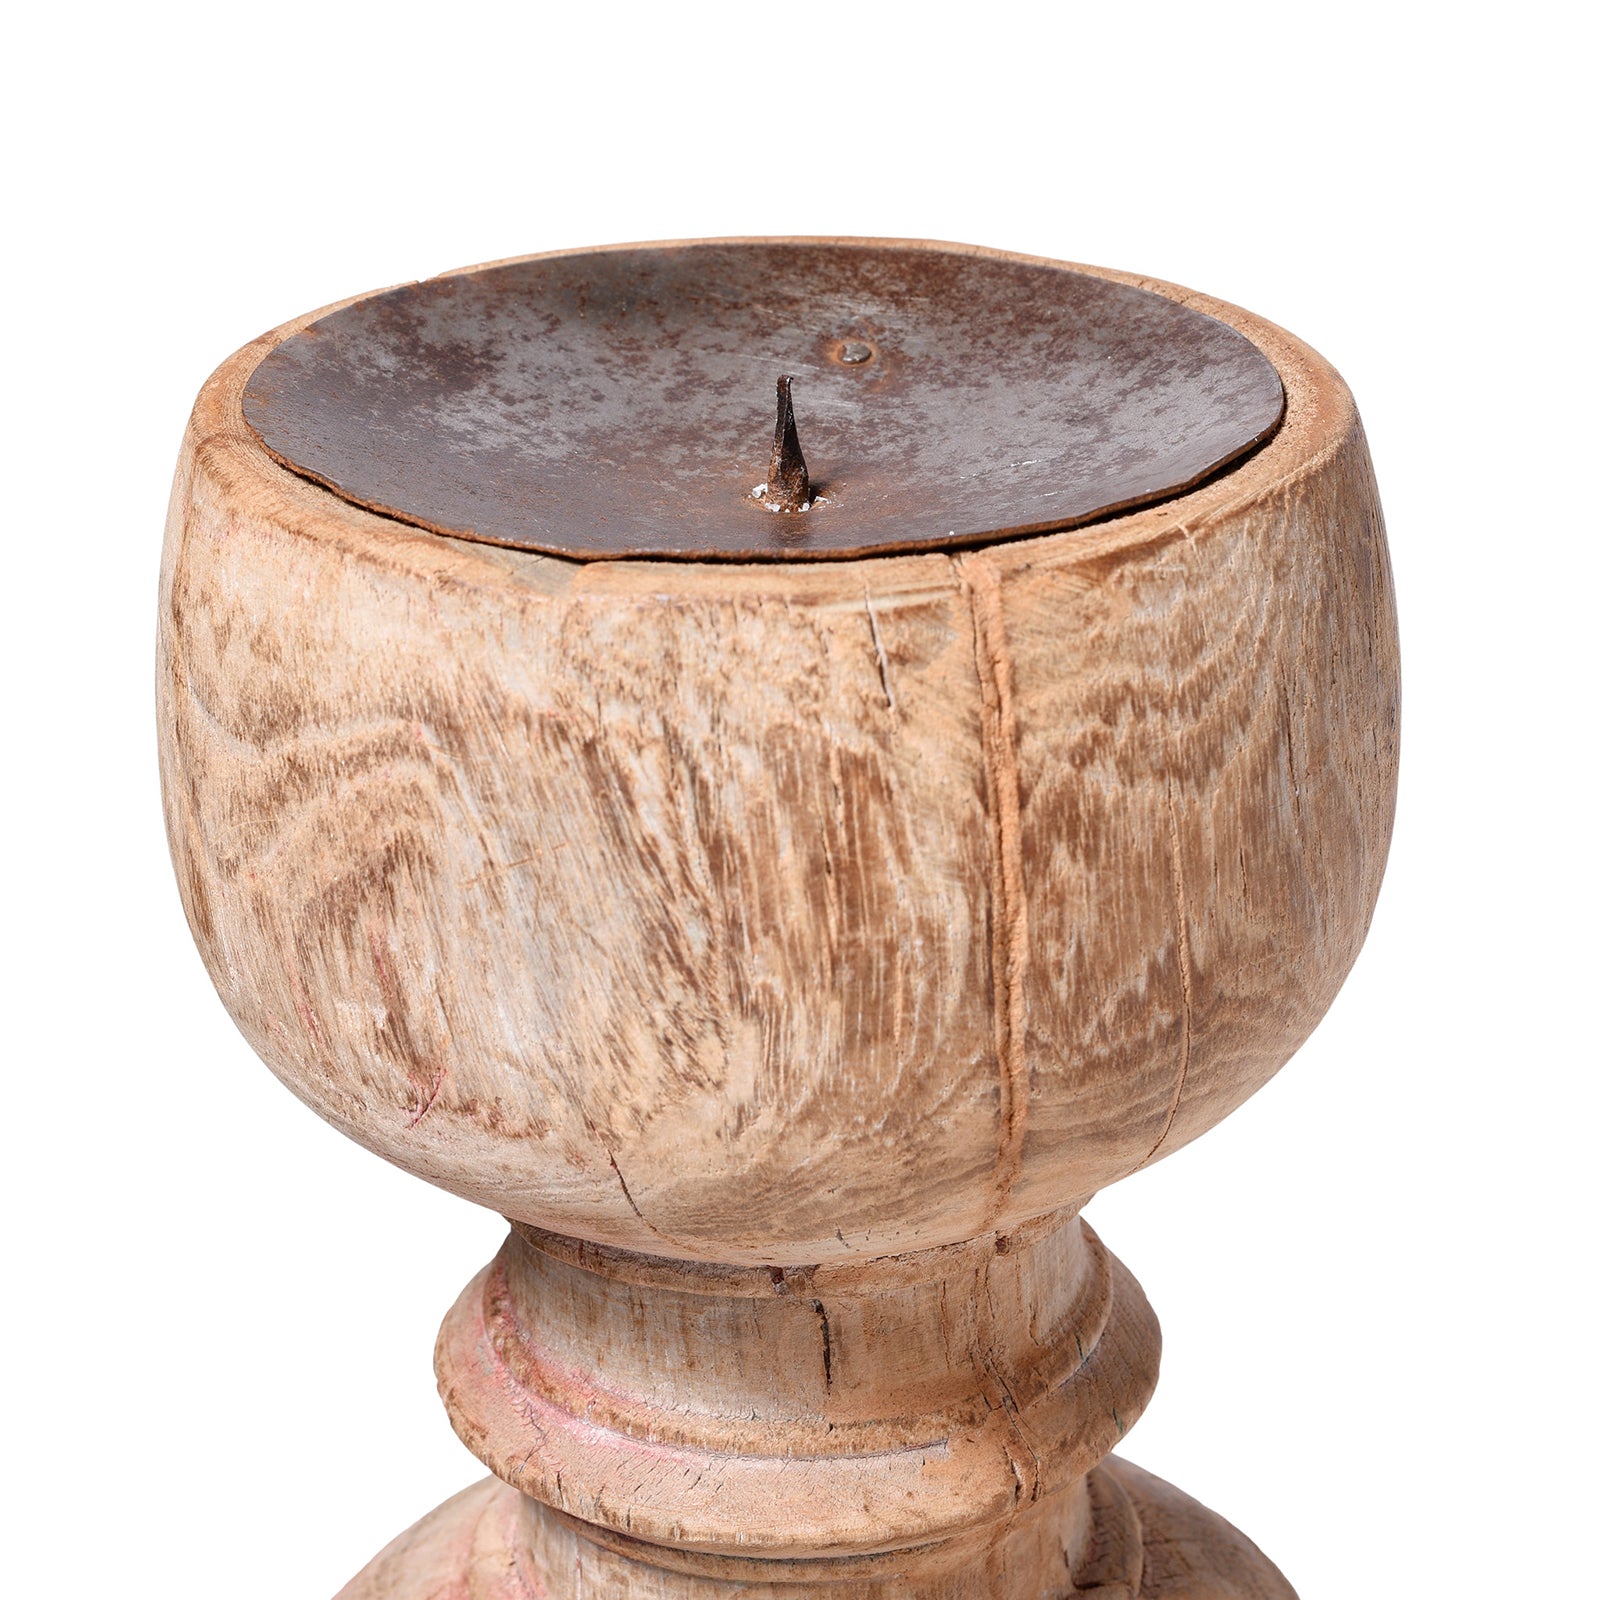 Carved Teak Candlestick Made From An Old Takhat Leg | Indigo Antiques